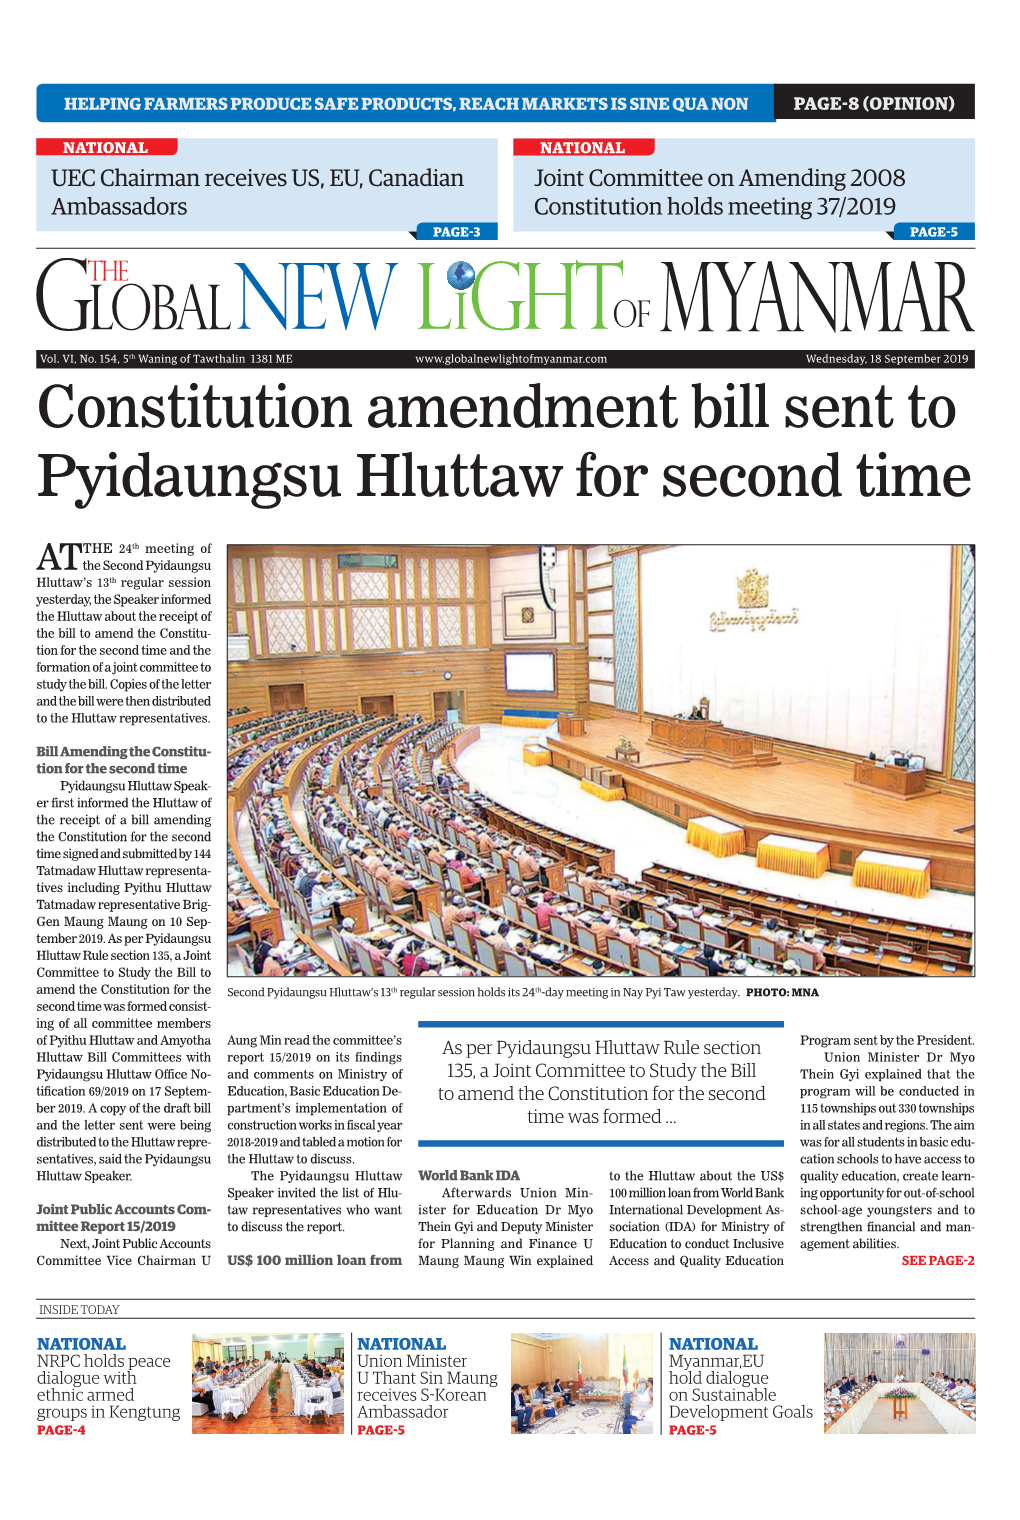 Constitution Amendment Bill Sent to Pyidaungsu Hluttaw for Second Time